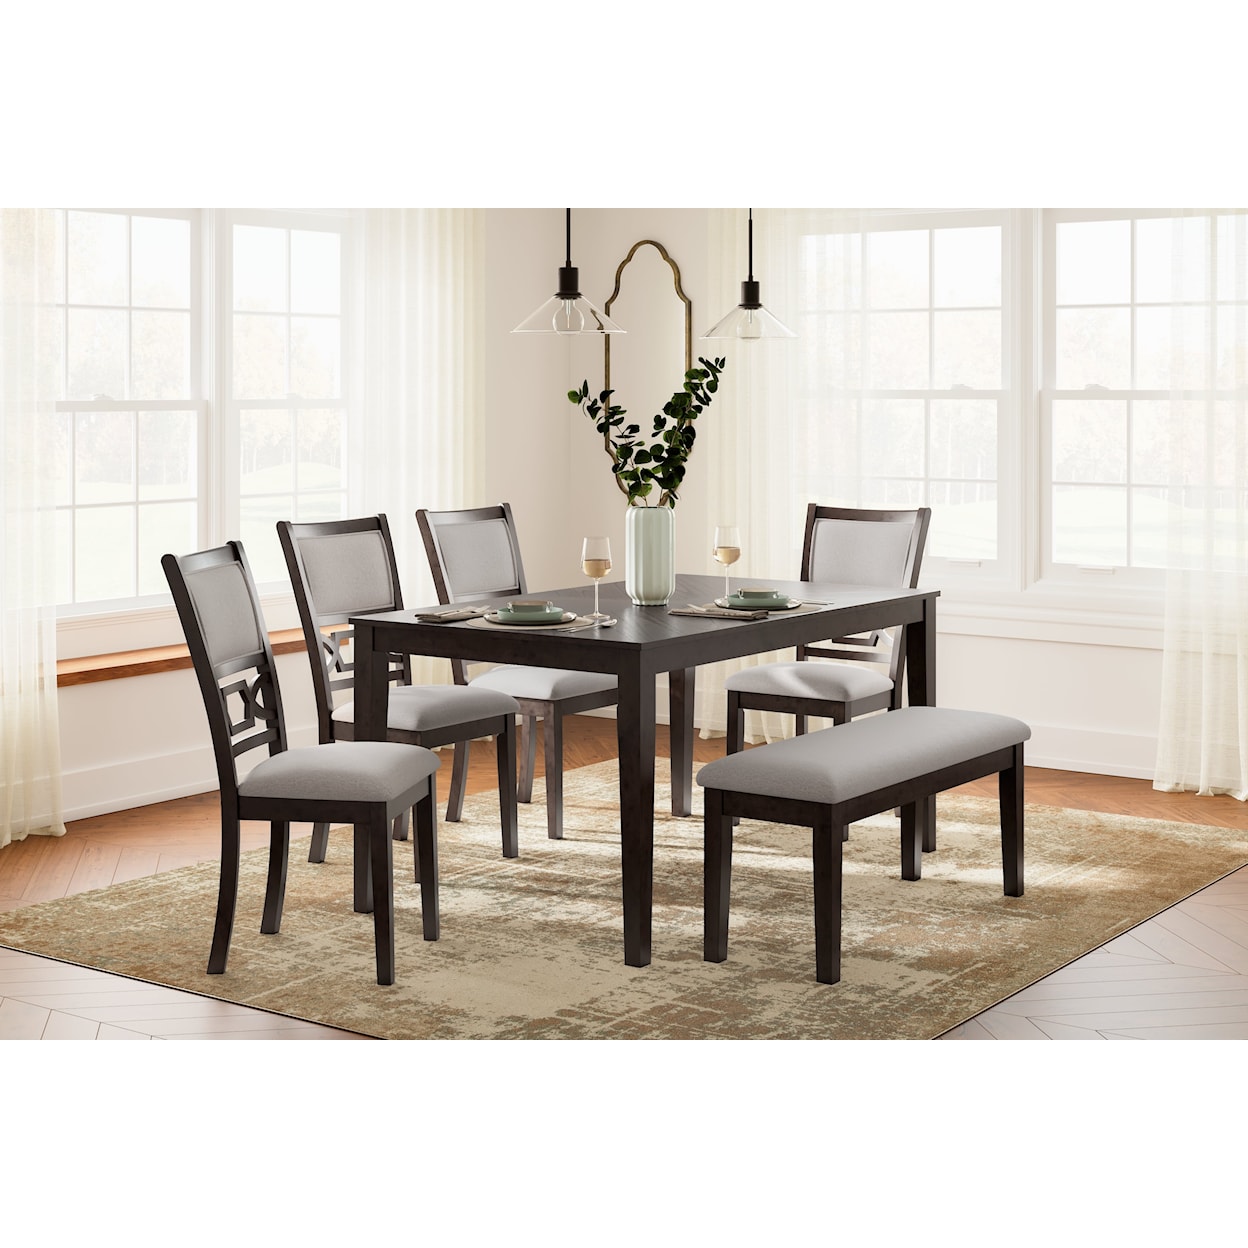 Signature Design by Ashley Langwest Dining Room Table Set